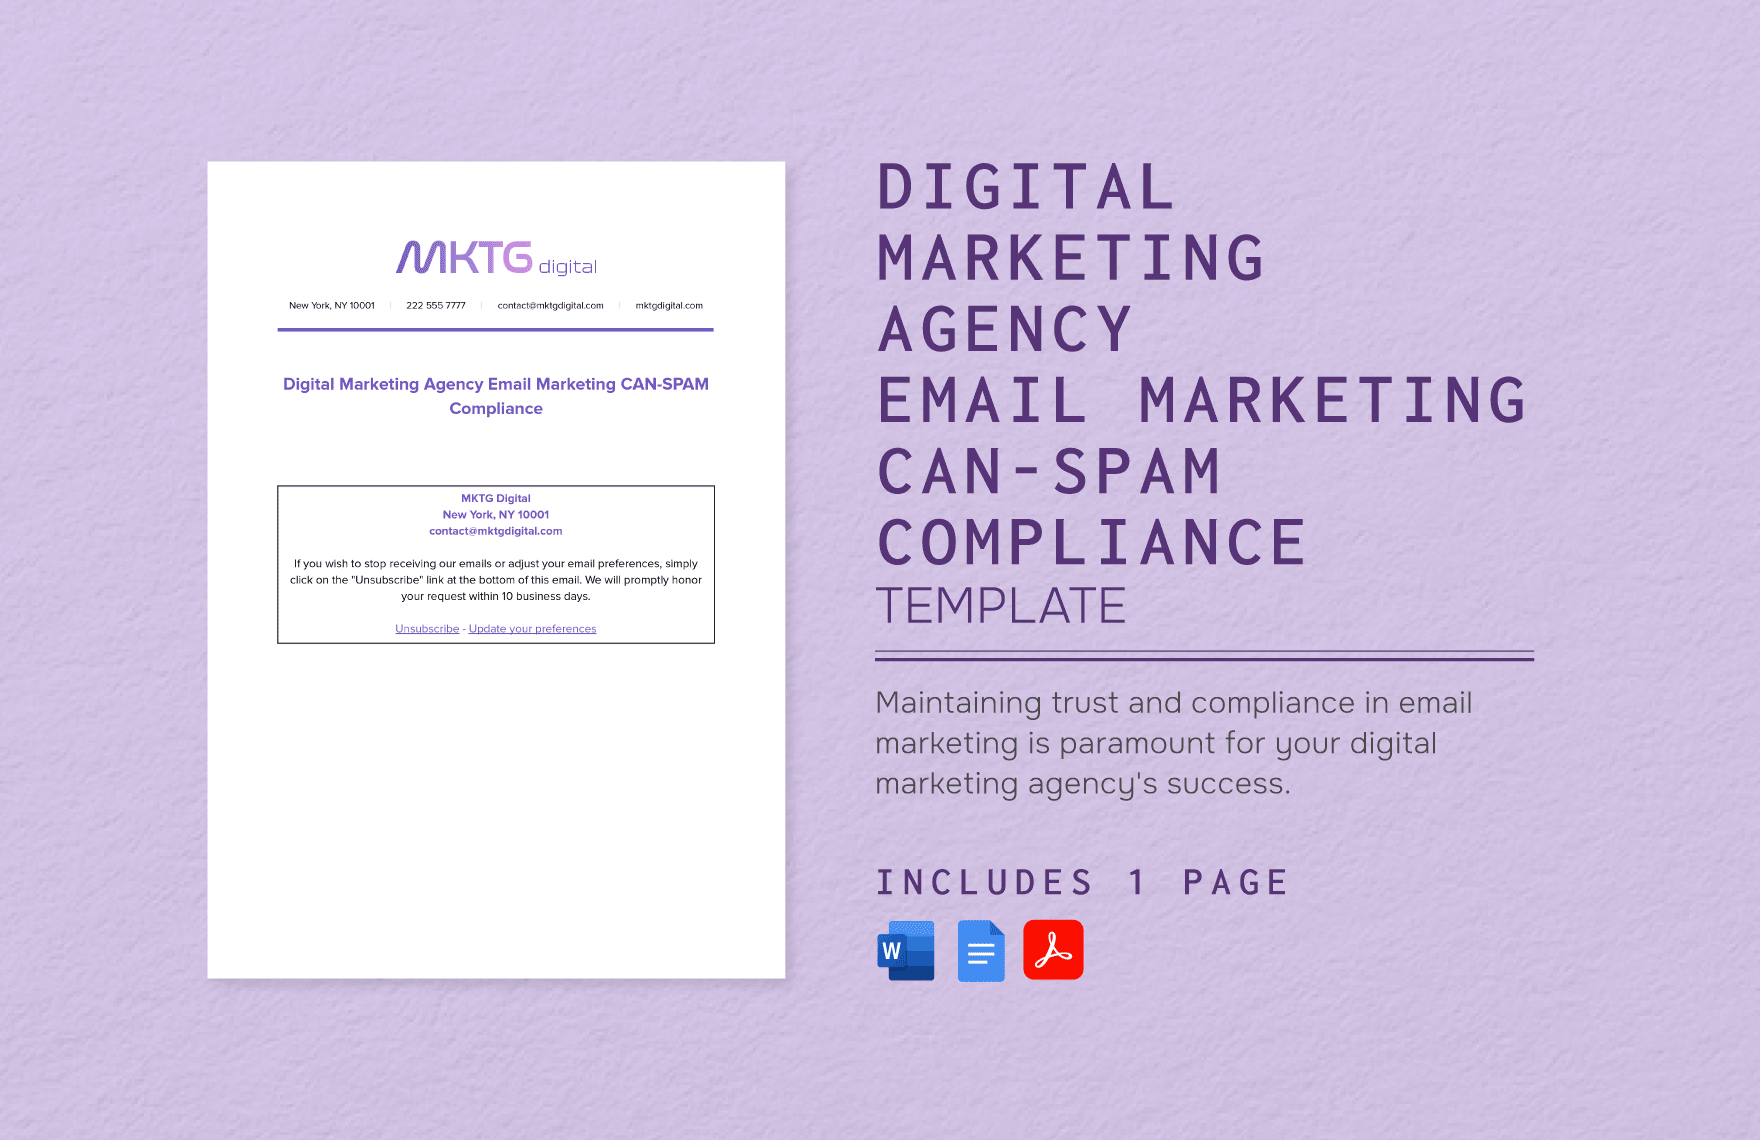 Digital Marketing Agency Email Marketing CAN-SPAM Compliance Template in Word, Google Docs, PDF